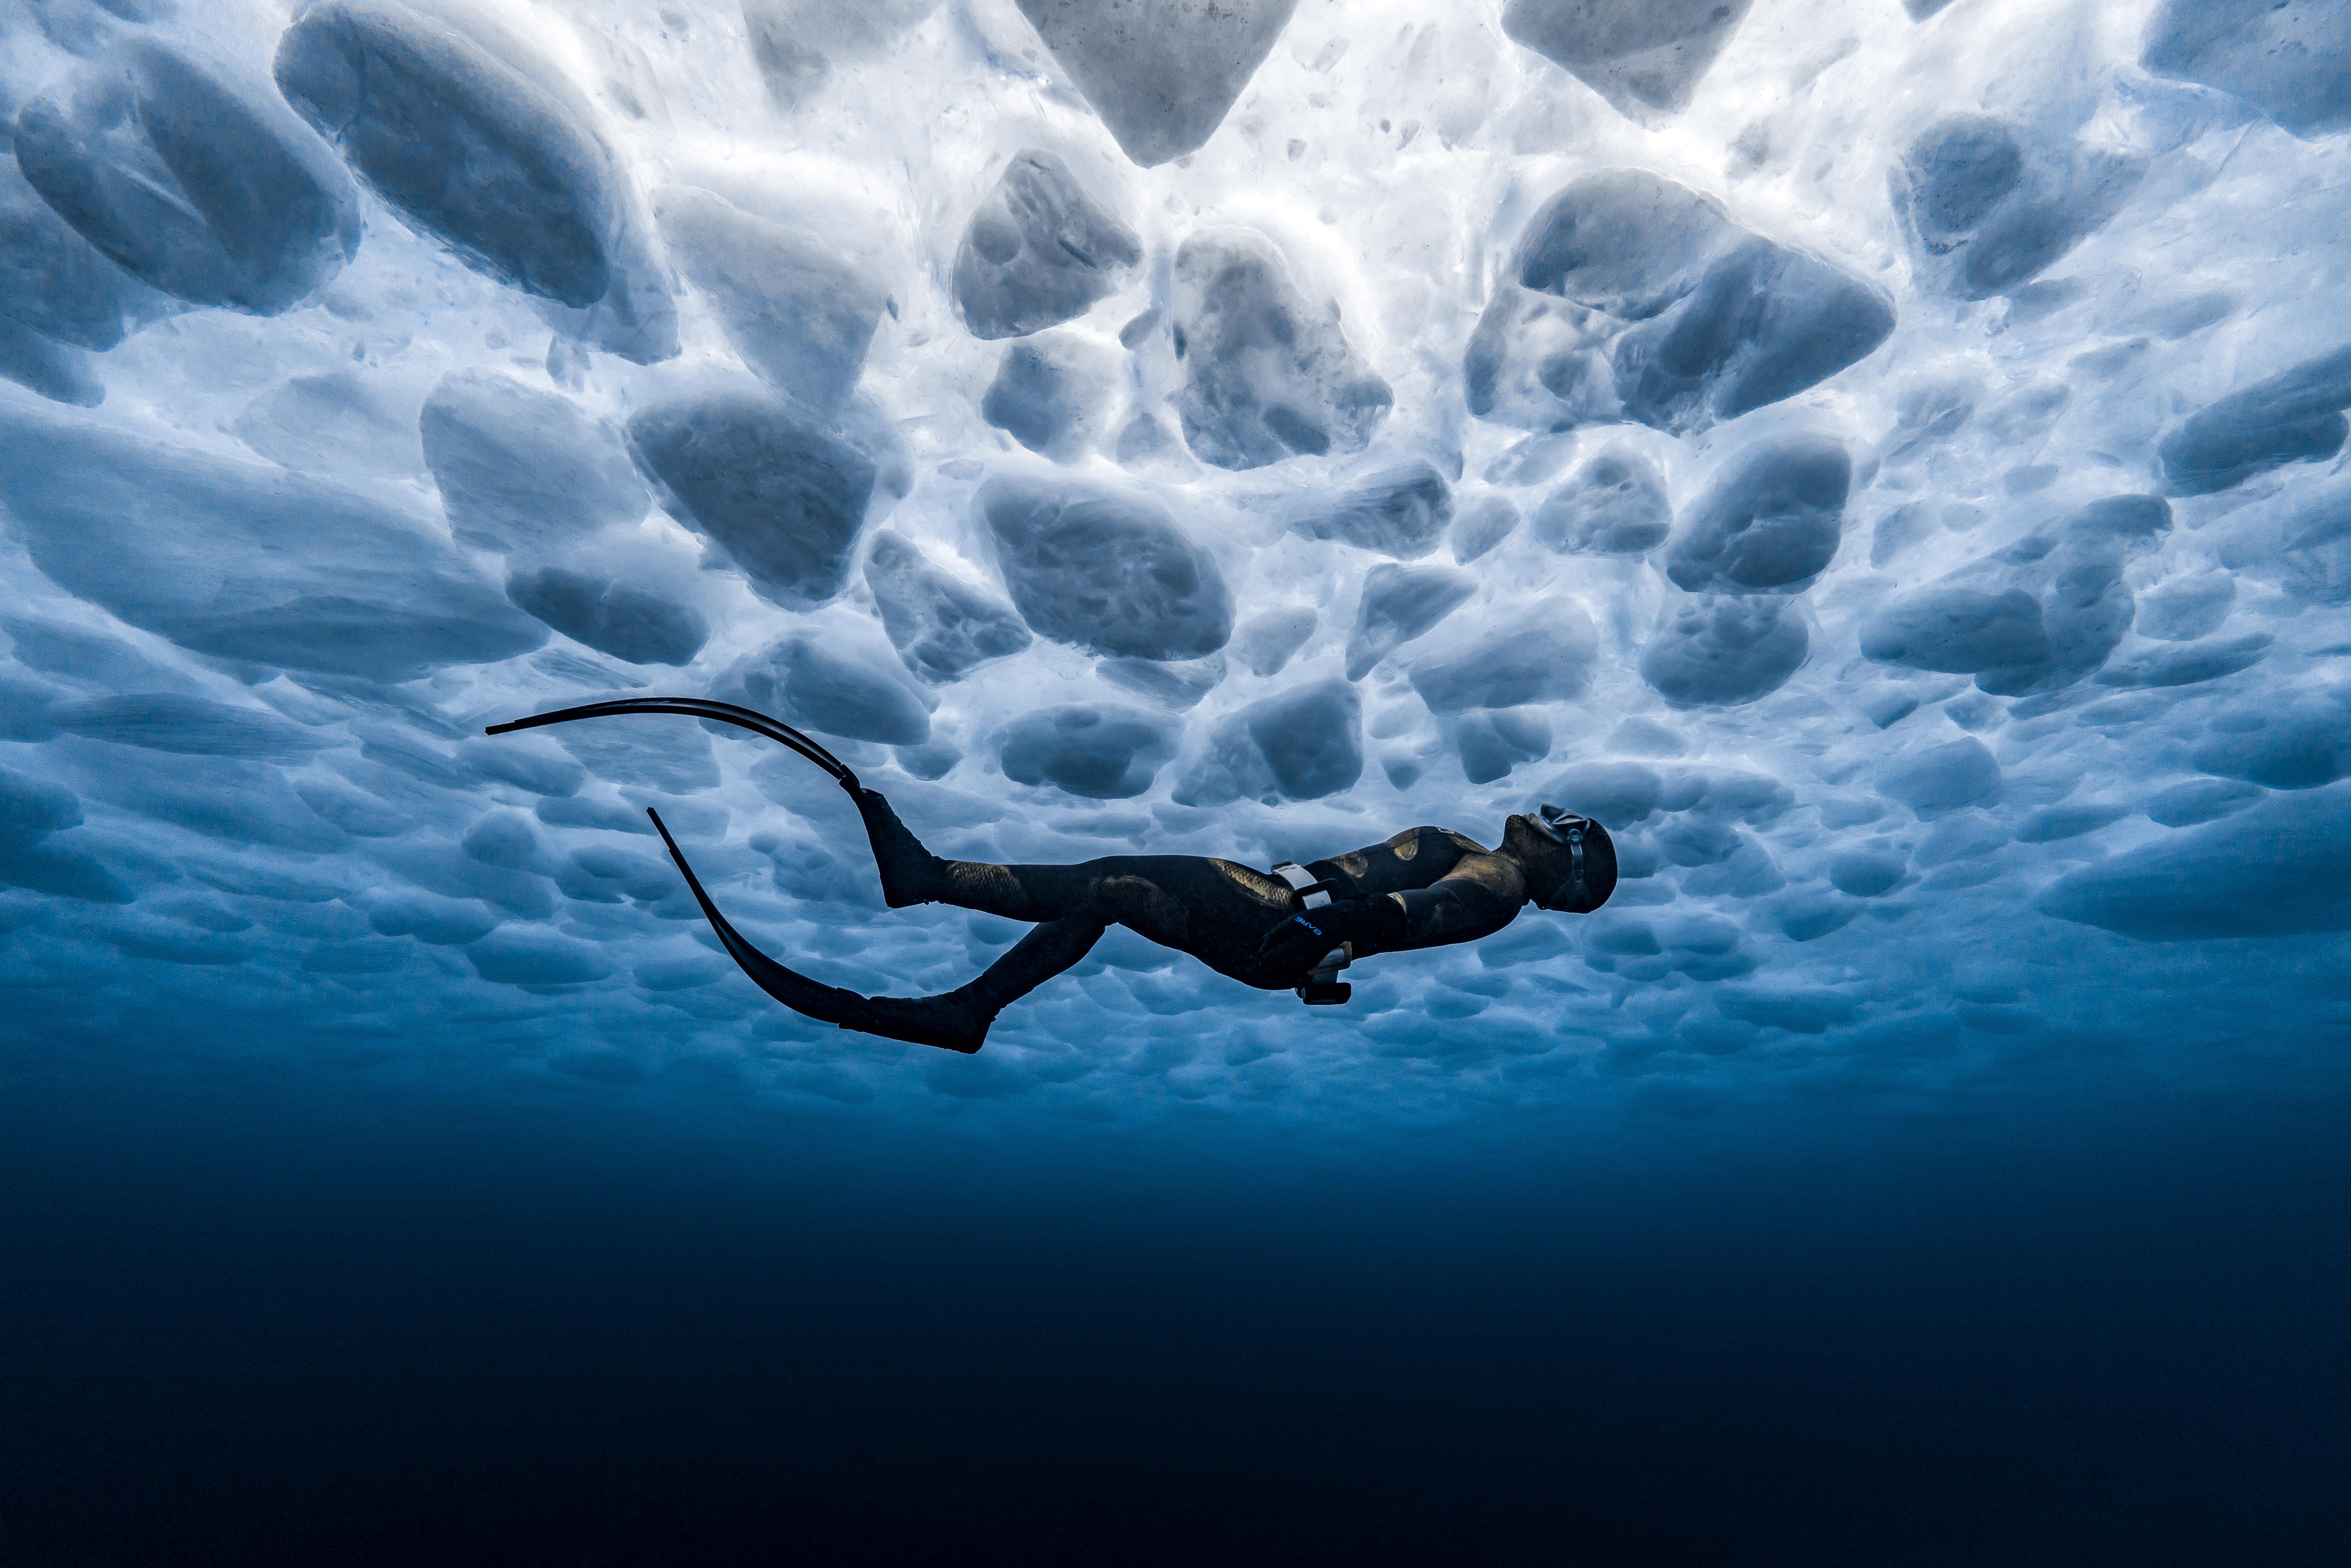 A freediver gazes up at the intricate ice patterns below the surface of a frozen lake. Canada